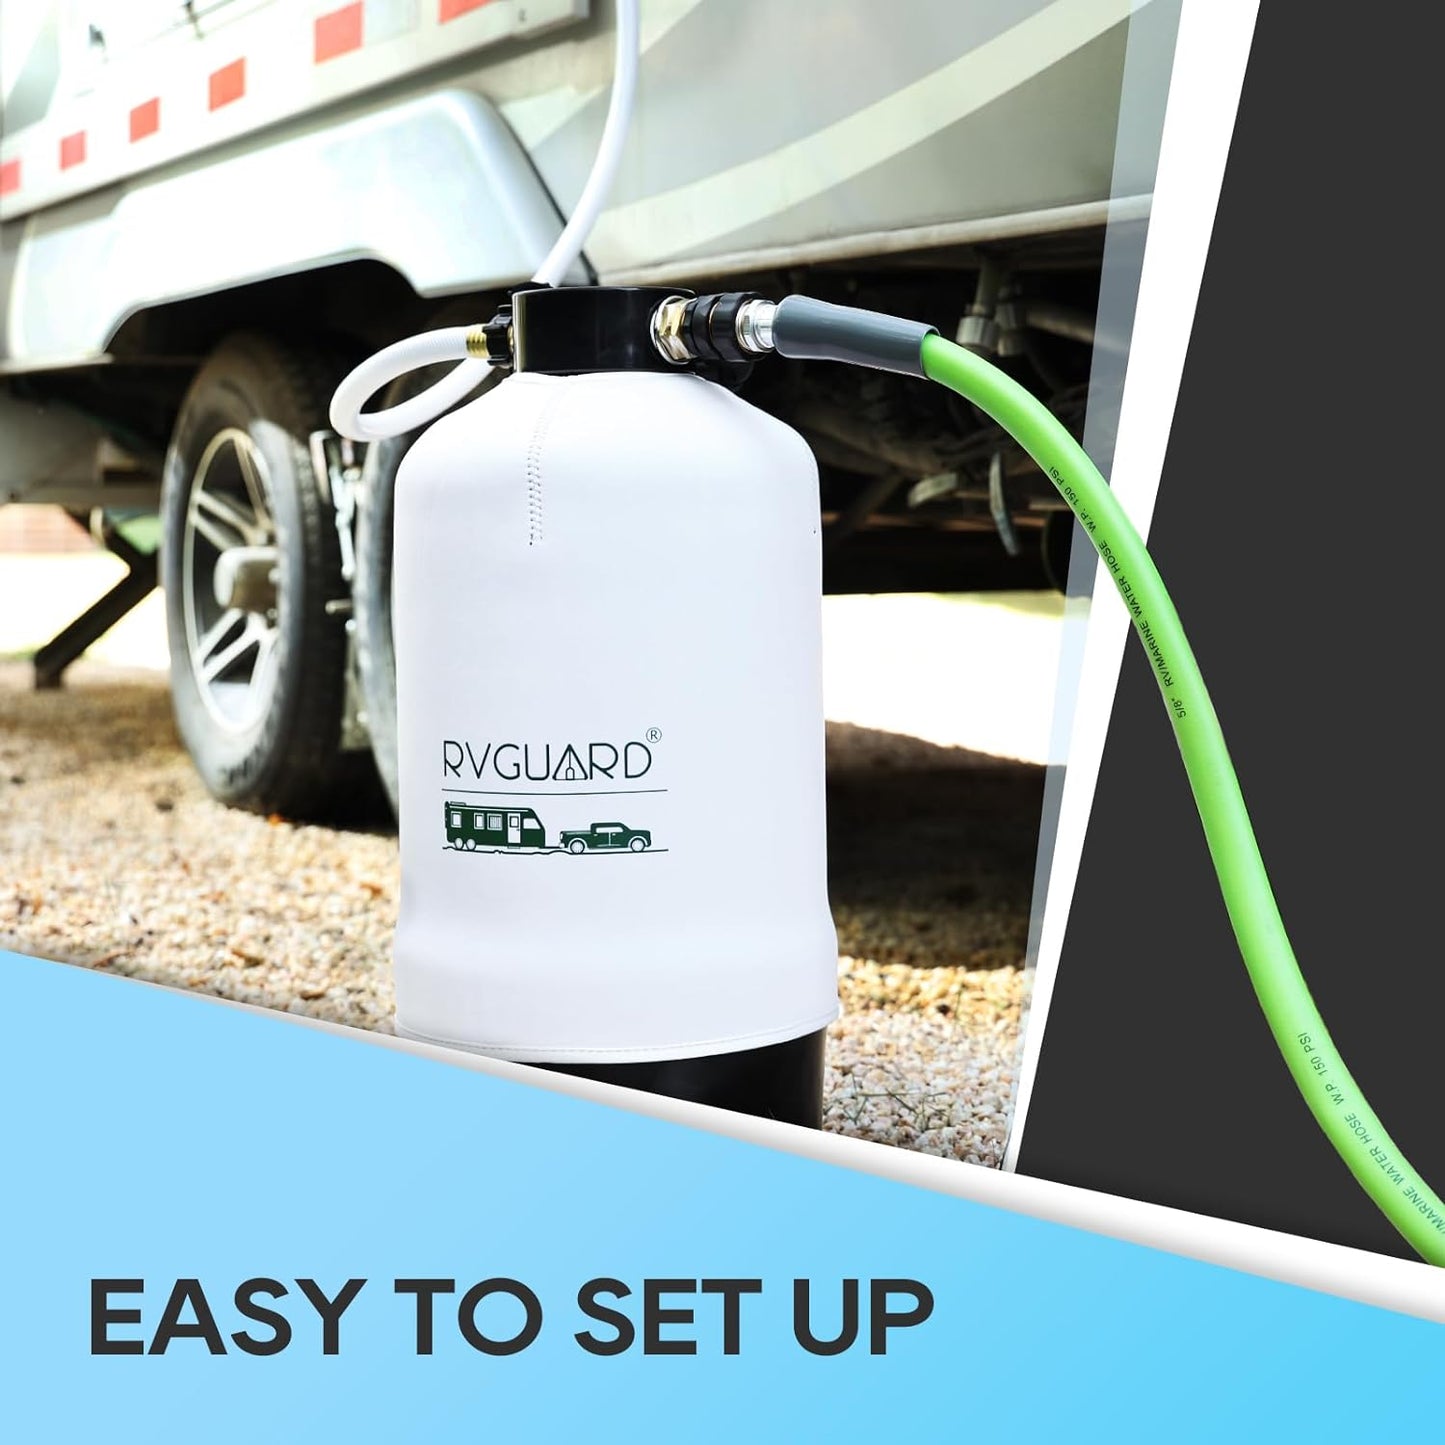 RVGUARD 16,000 Grains Portable Water Softener for RV, Reduces Hardness & Minerals & Improve Water Quality, Protects Water Systems from Hard Water D